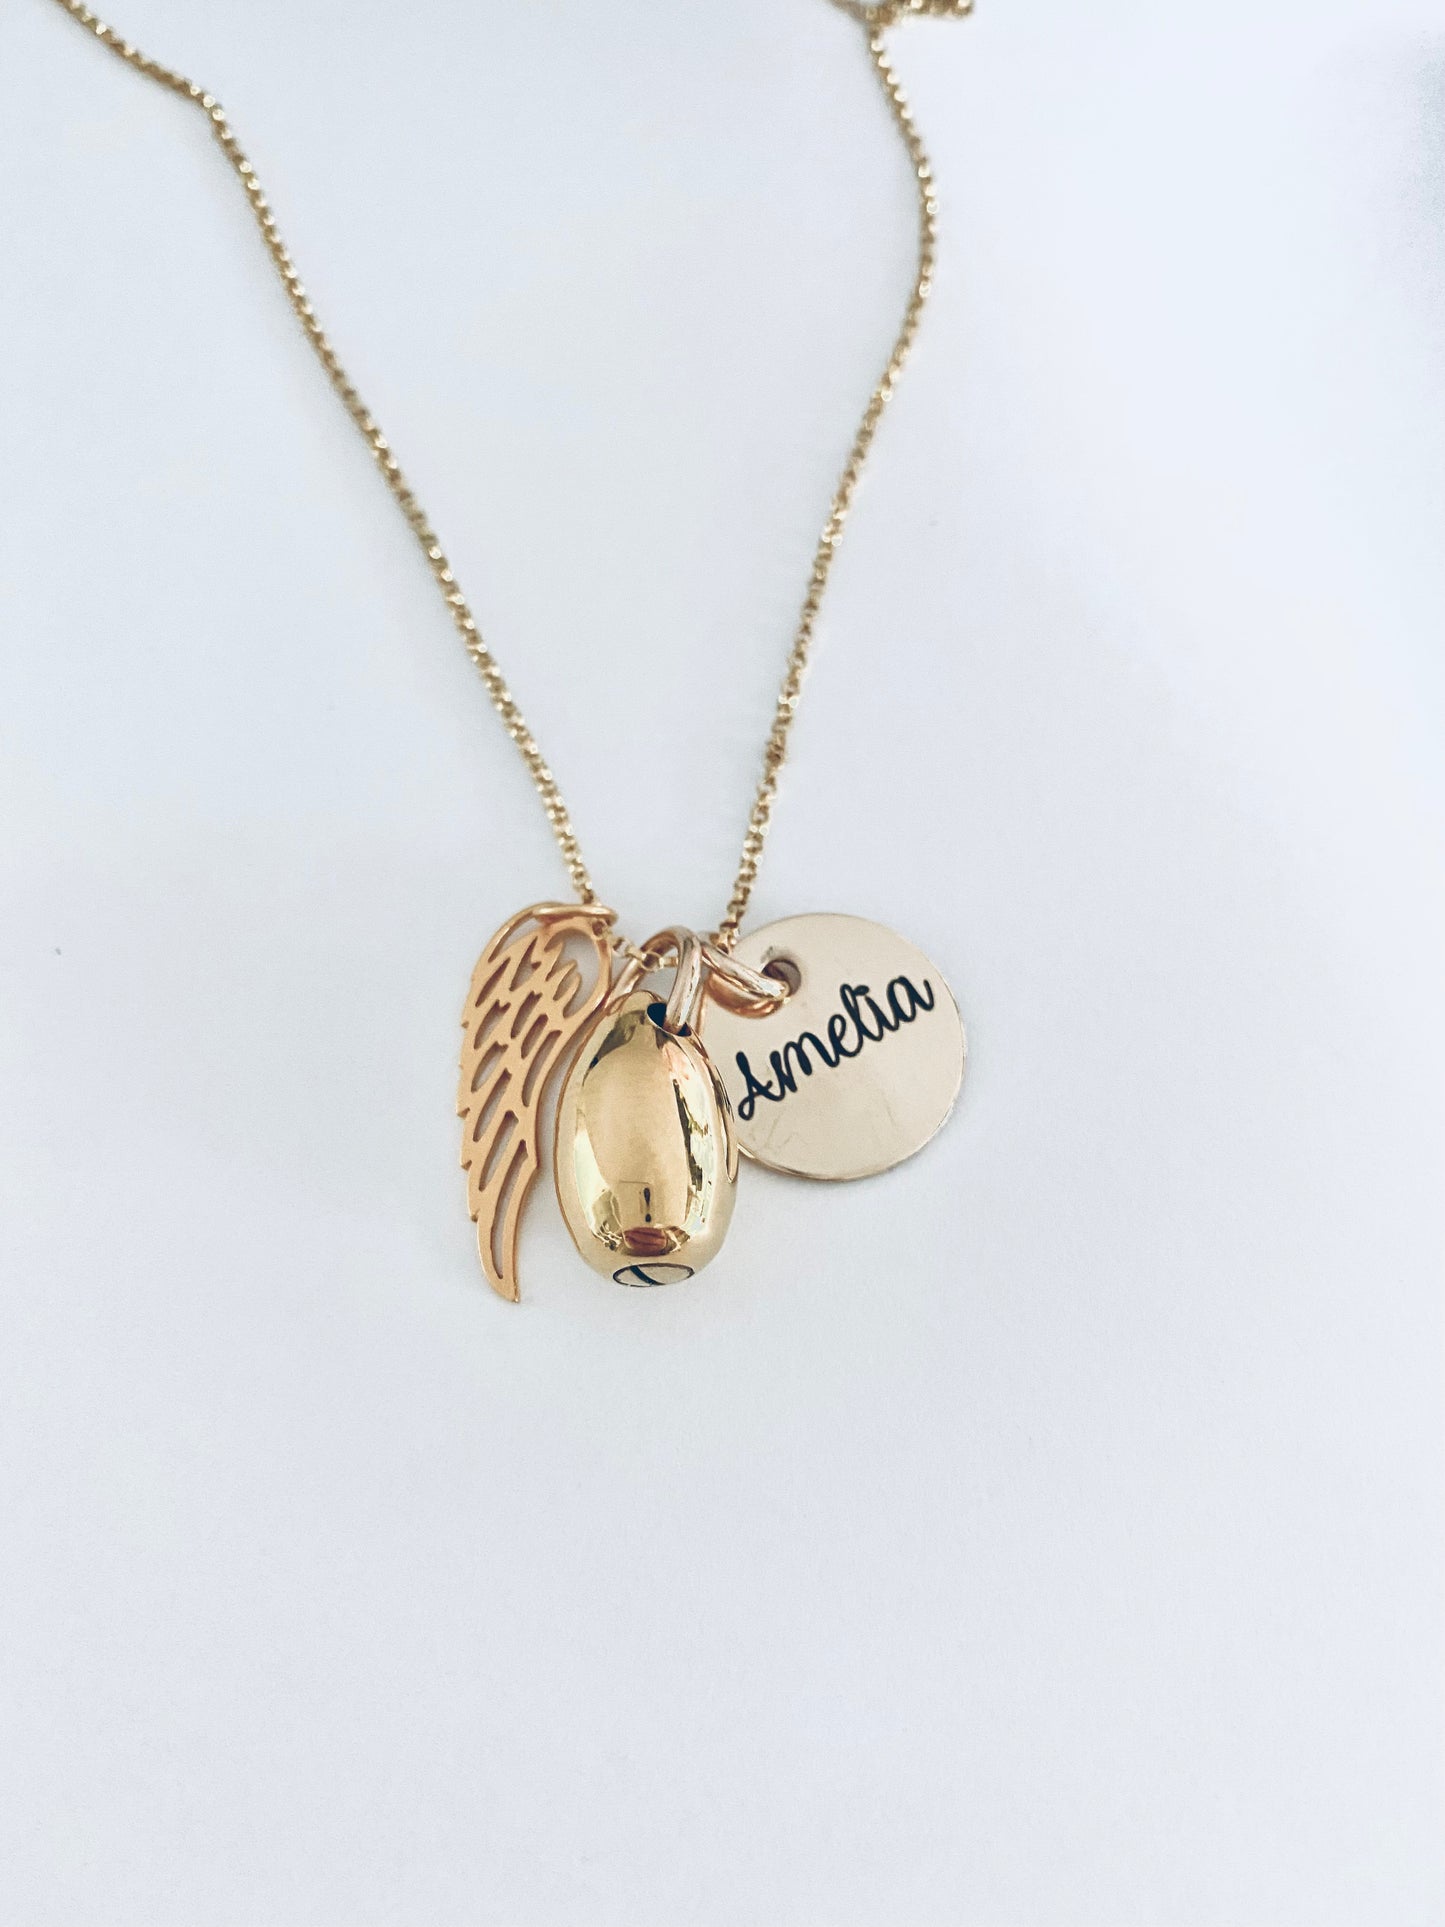 Gold Angel Wing Teardrop Urn Necklace with Engraved Round Pendant